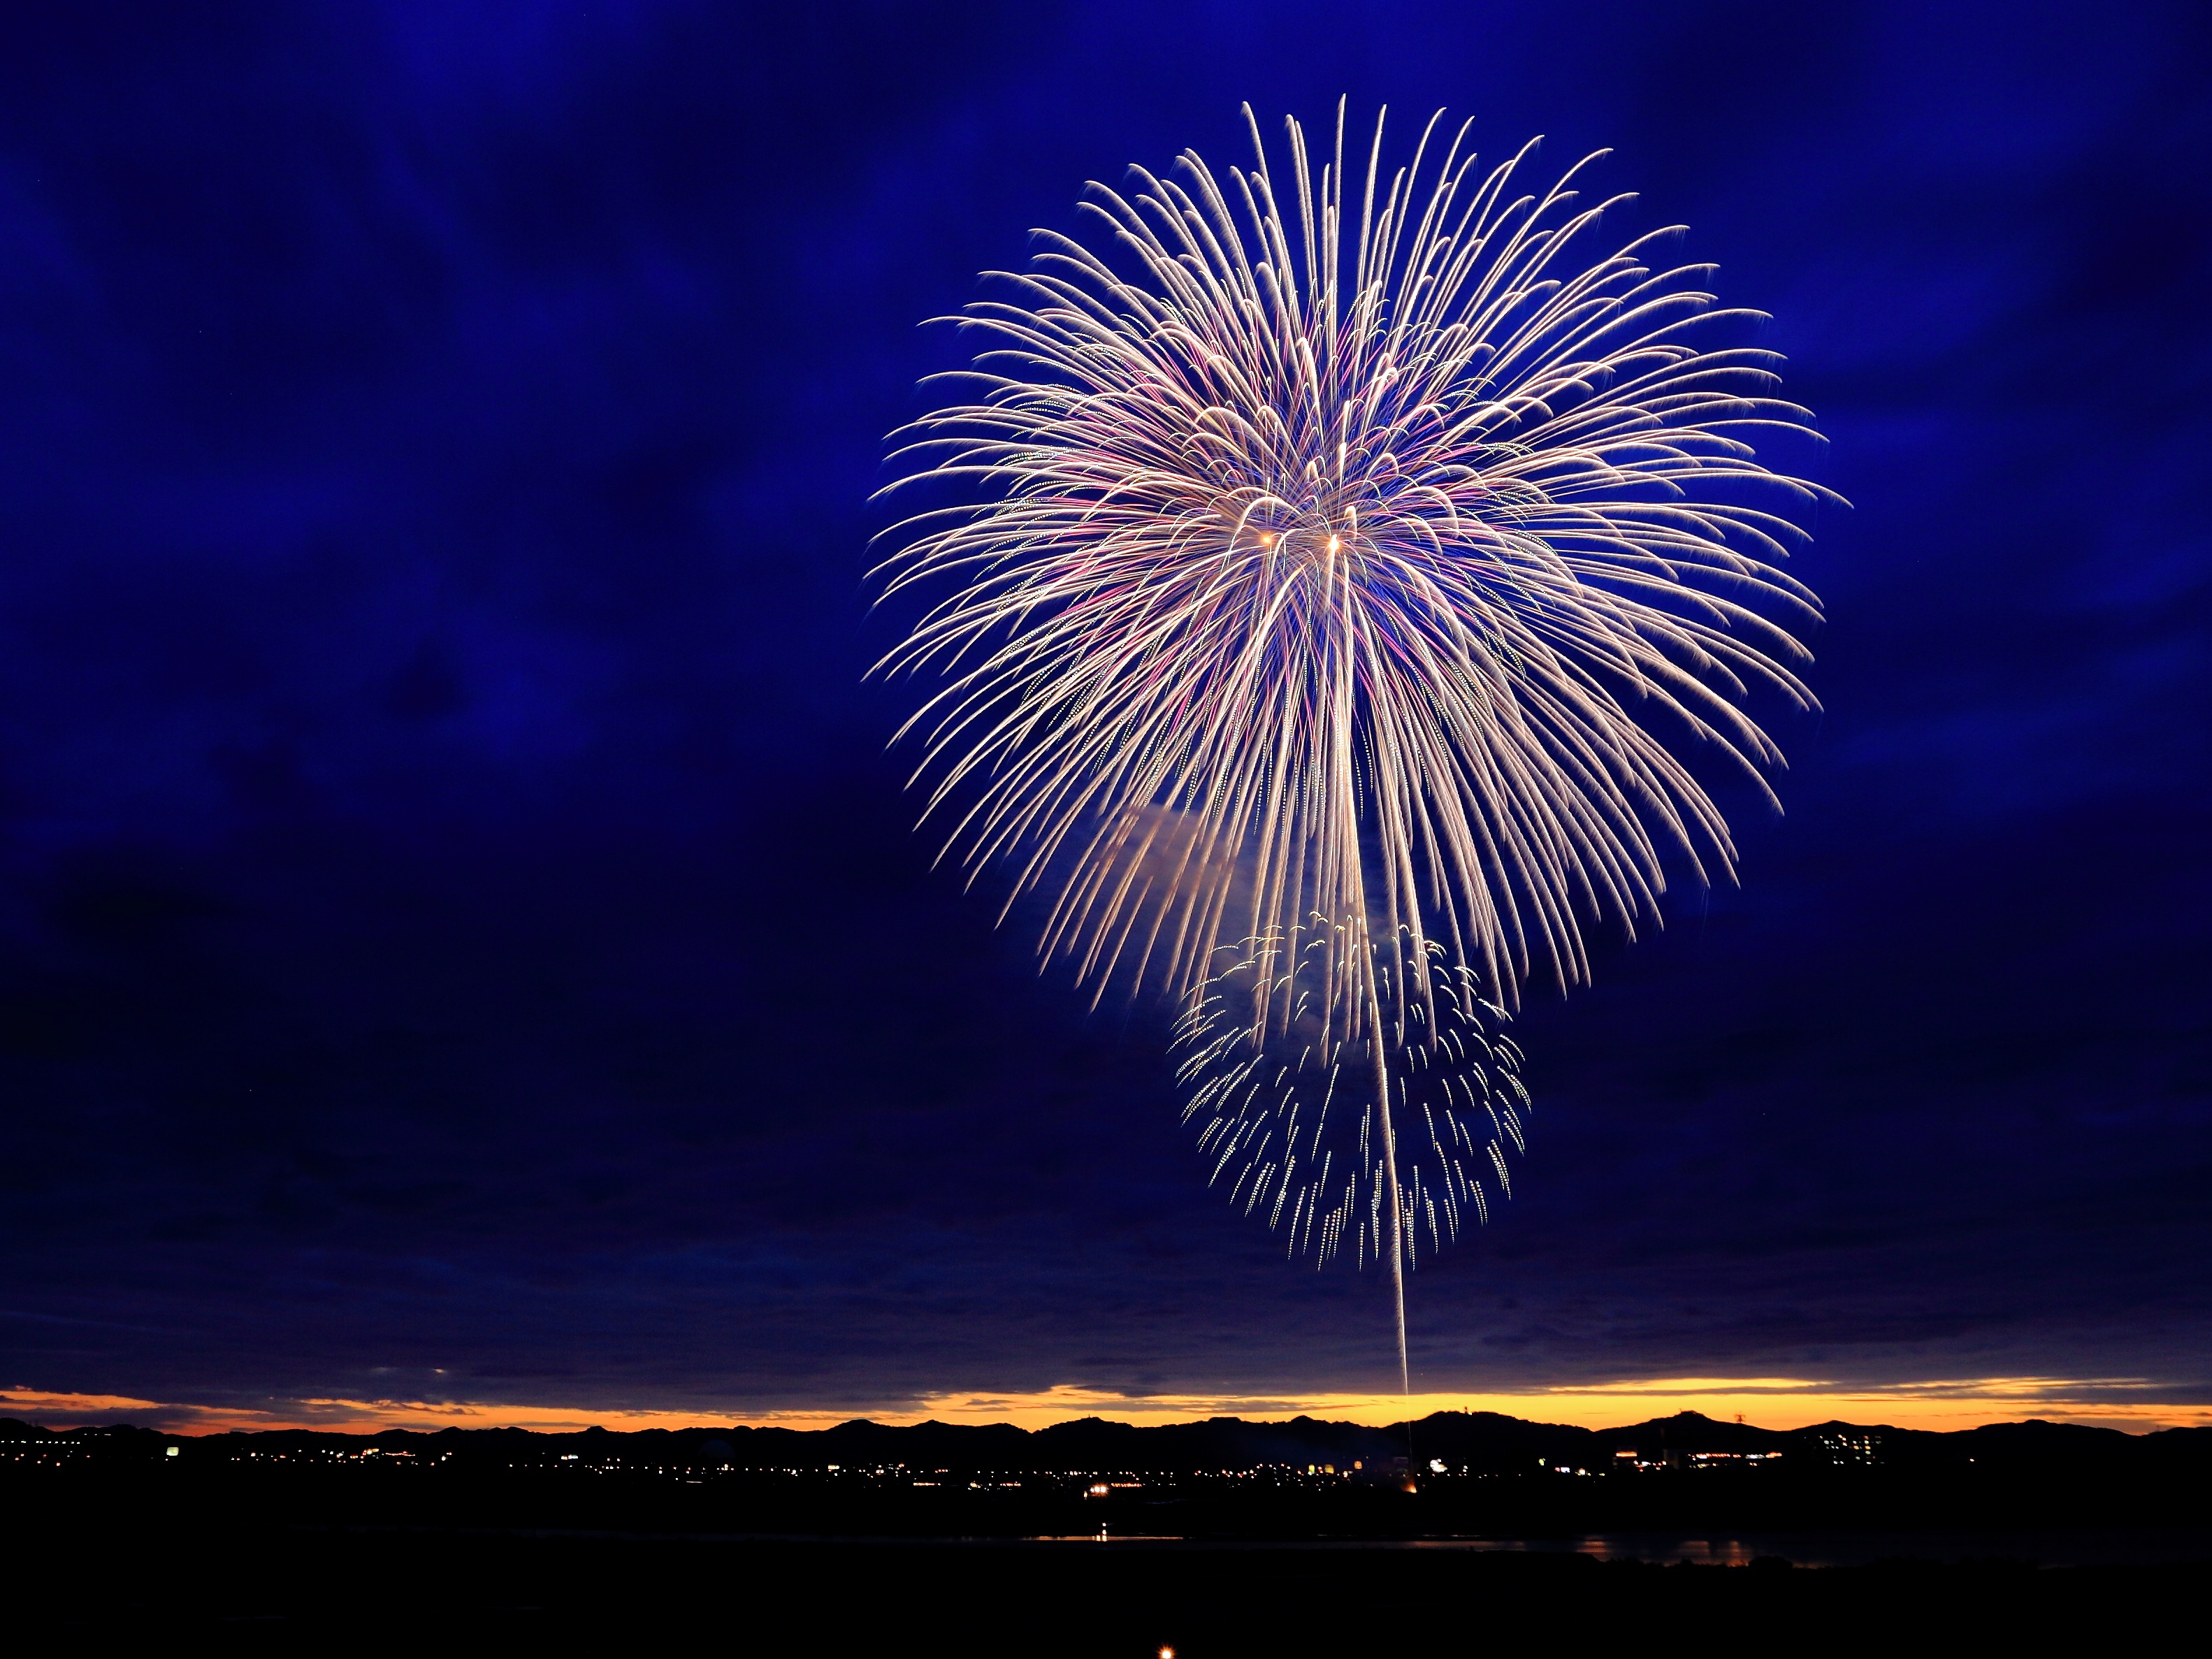 PHOTO: Fireworks in the night sky for the Fourth of July. Photo courtesy of Pexels.com Source: https://bit.ly/2L3n13P